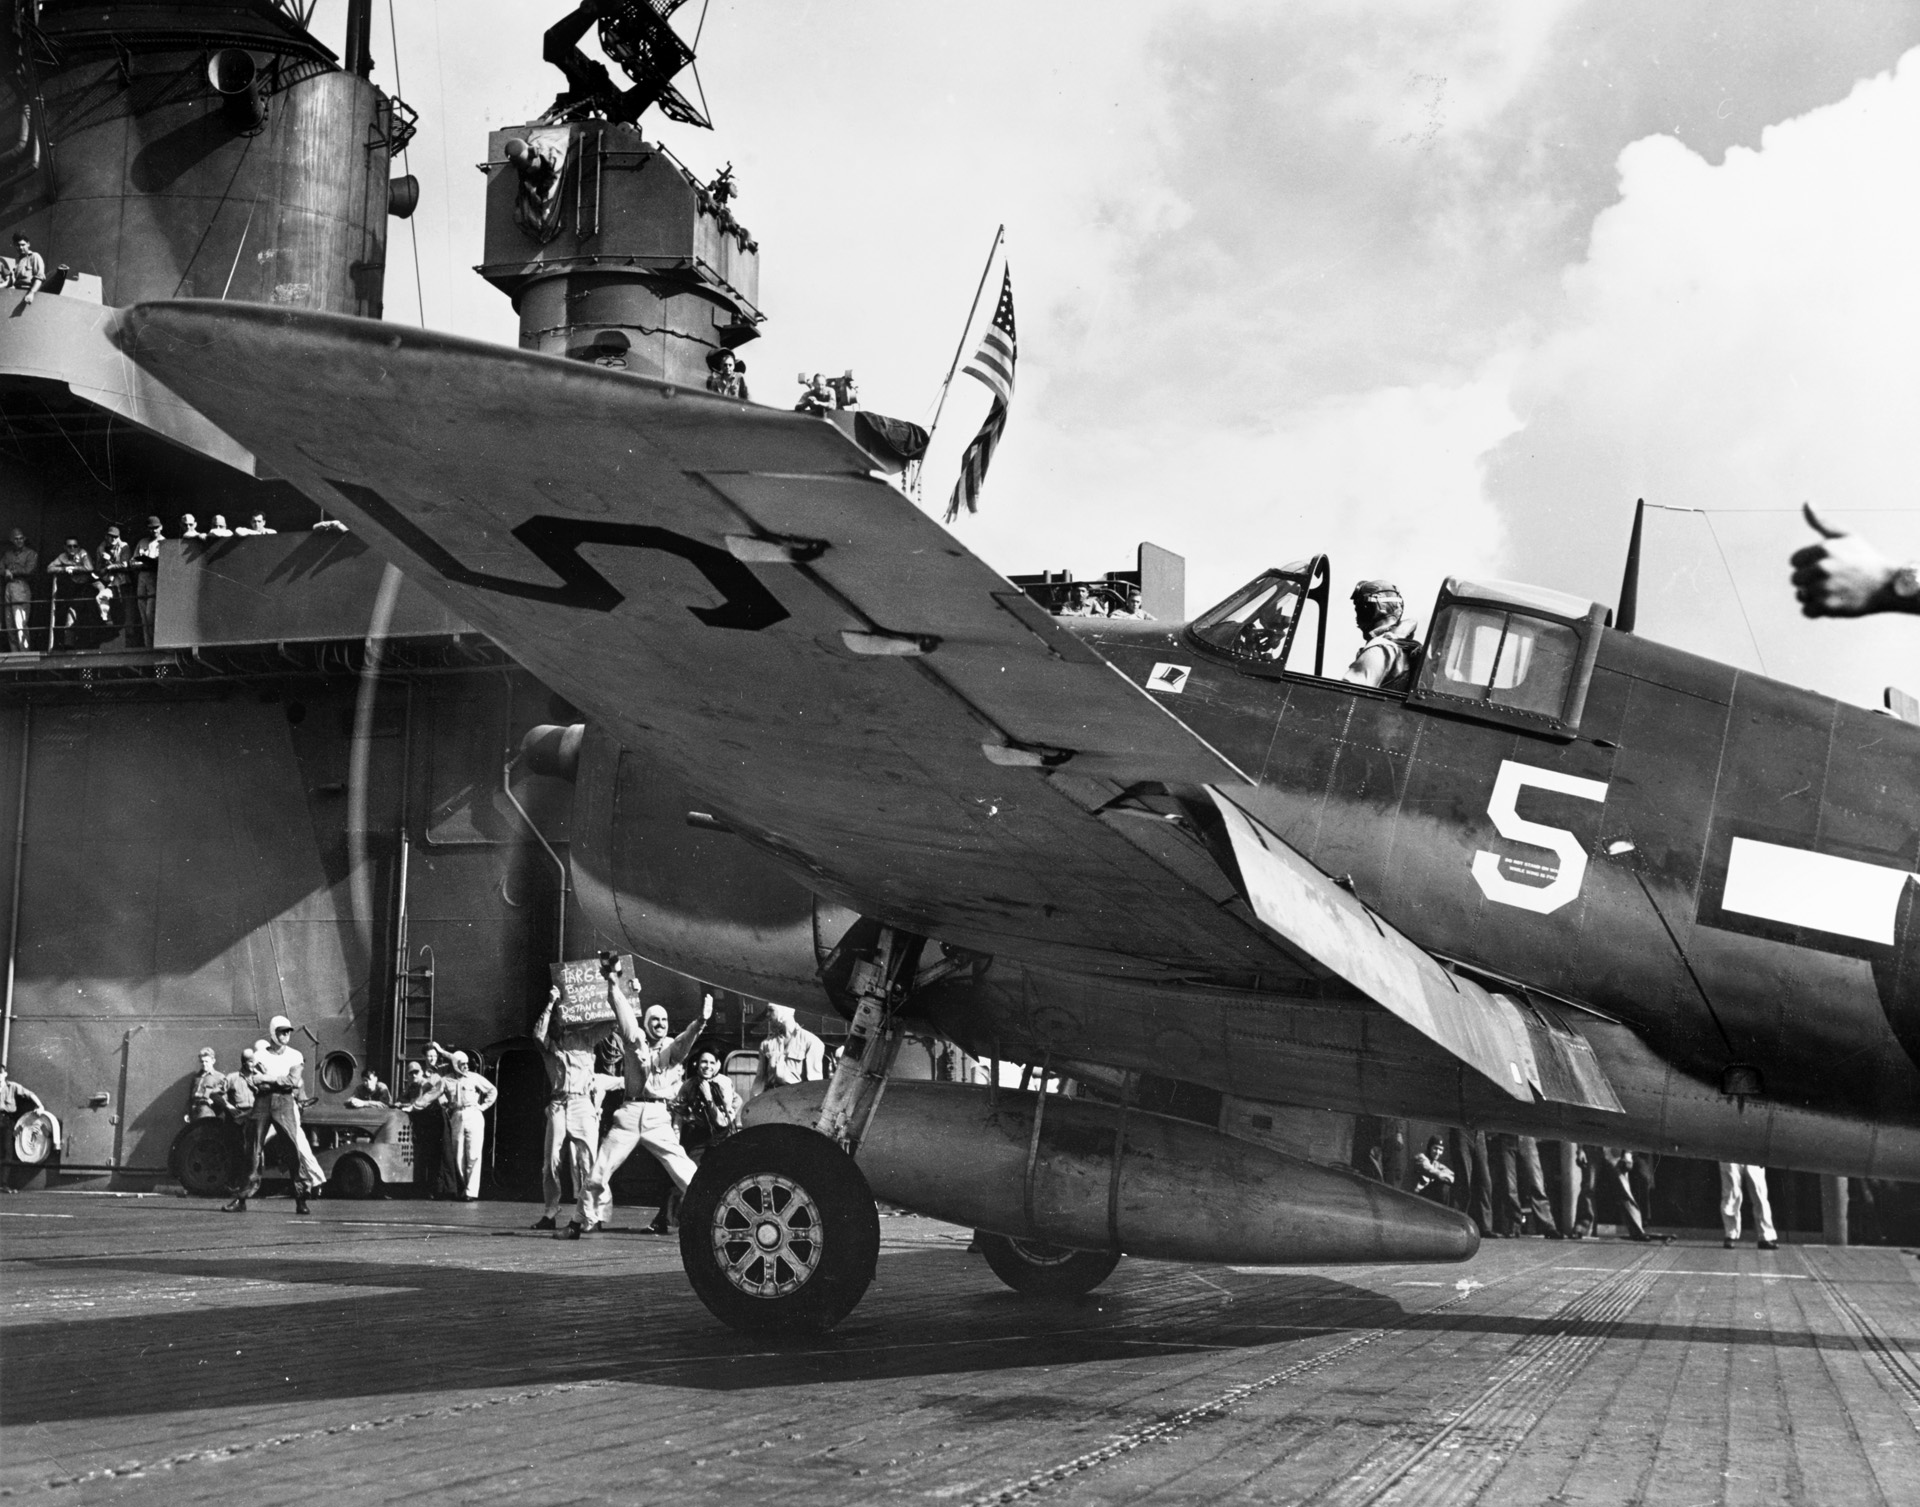 A Grumman F6F Hellcat fighter of Squadron VF-1 prepares for takeoff from the deck of the aircraft  carrier USS Yorktown on June 19, 1944, during the Battle of the Philippine Sea. American fighters dominated the skies and inflicted grievous losses  on the Japanese.